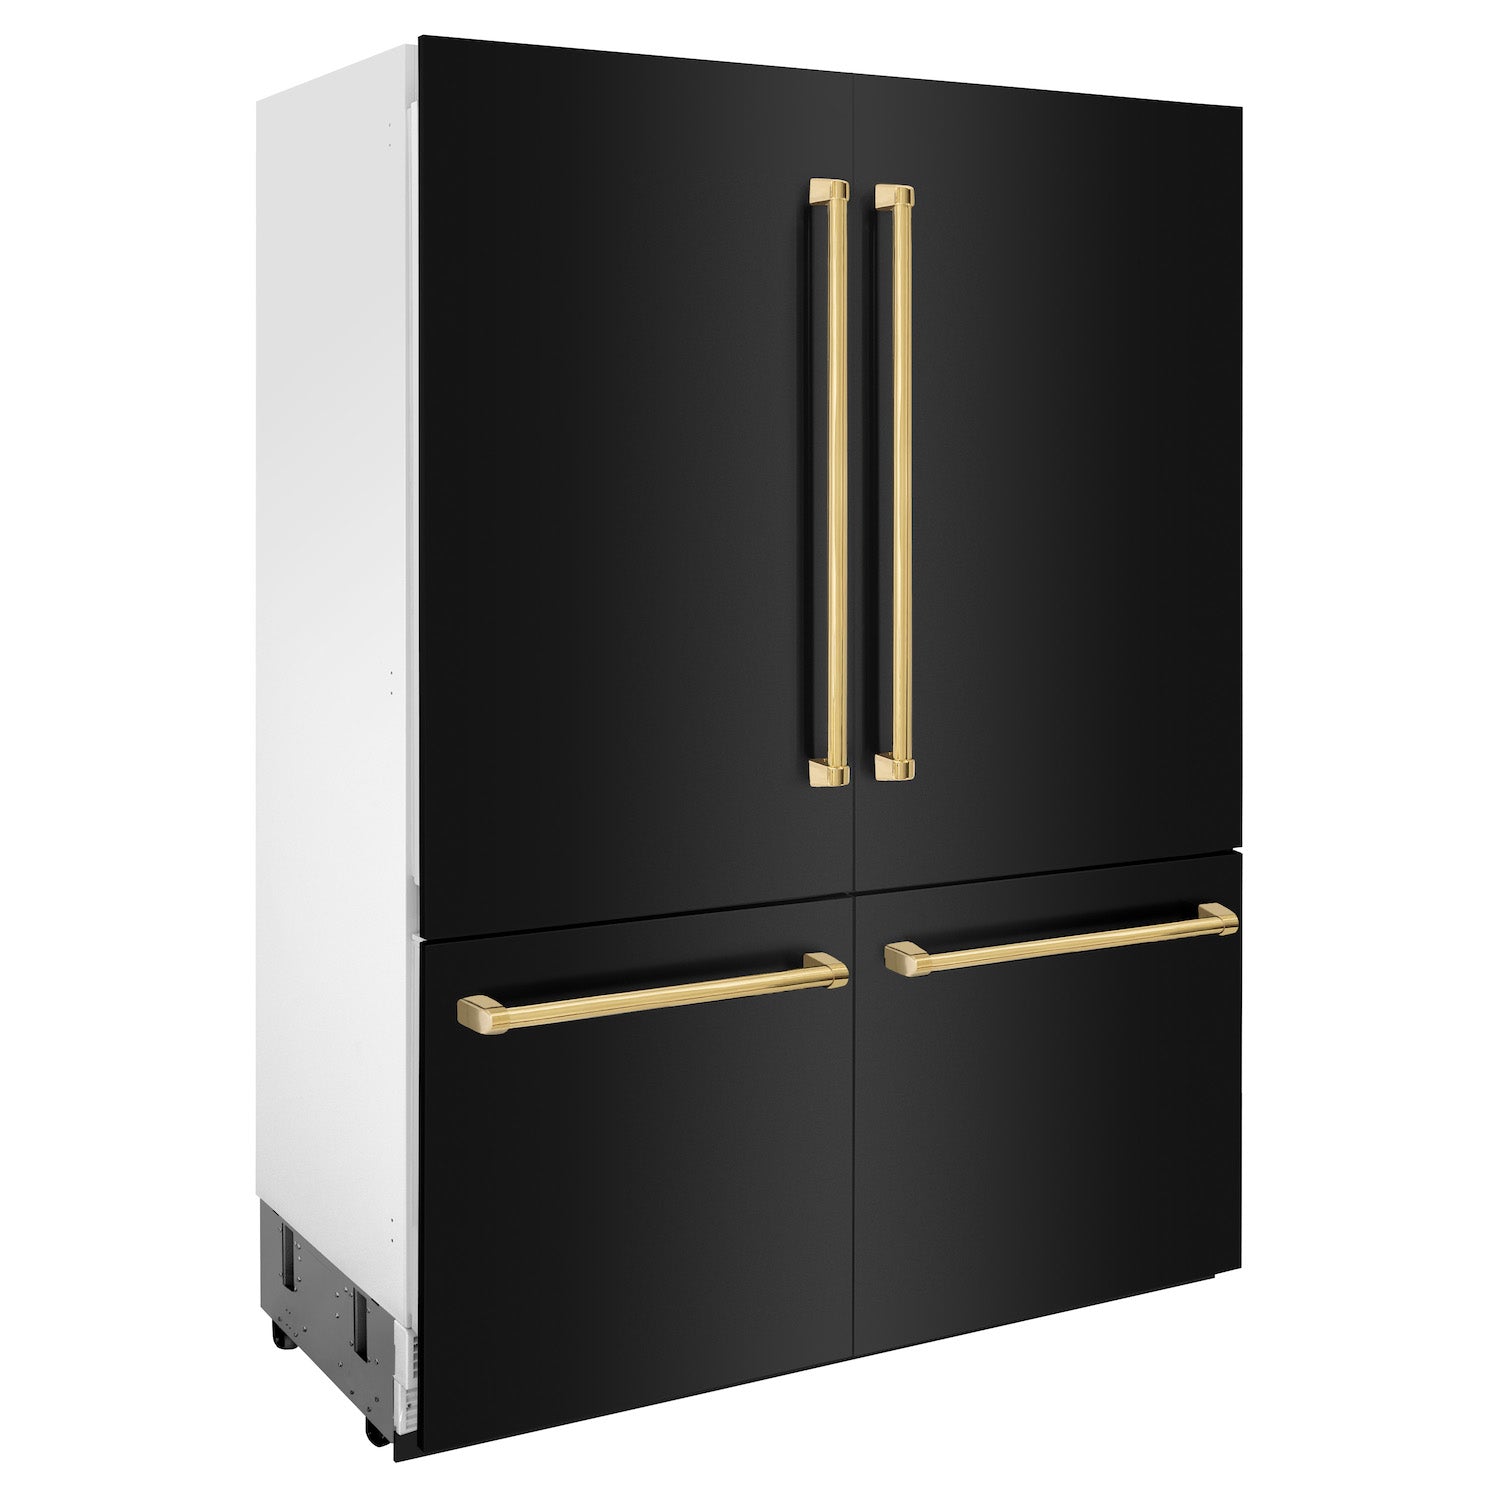 ZLINE 60" Autograph Edition Built-in French Door Refrigerator in Black Stainless Steel with Polished Gold Accents side.